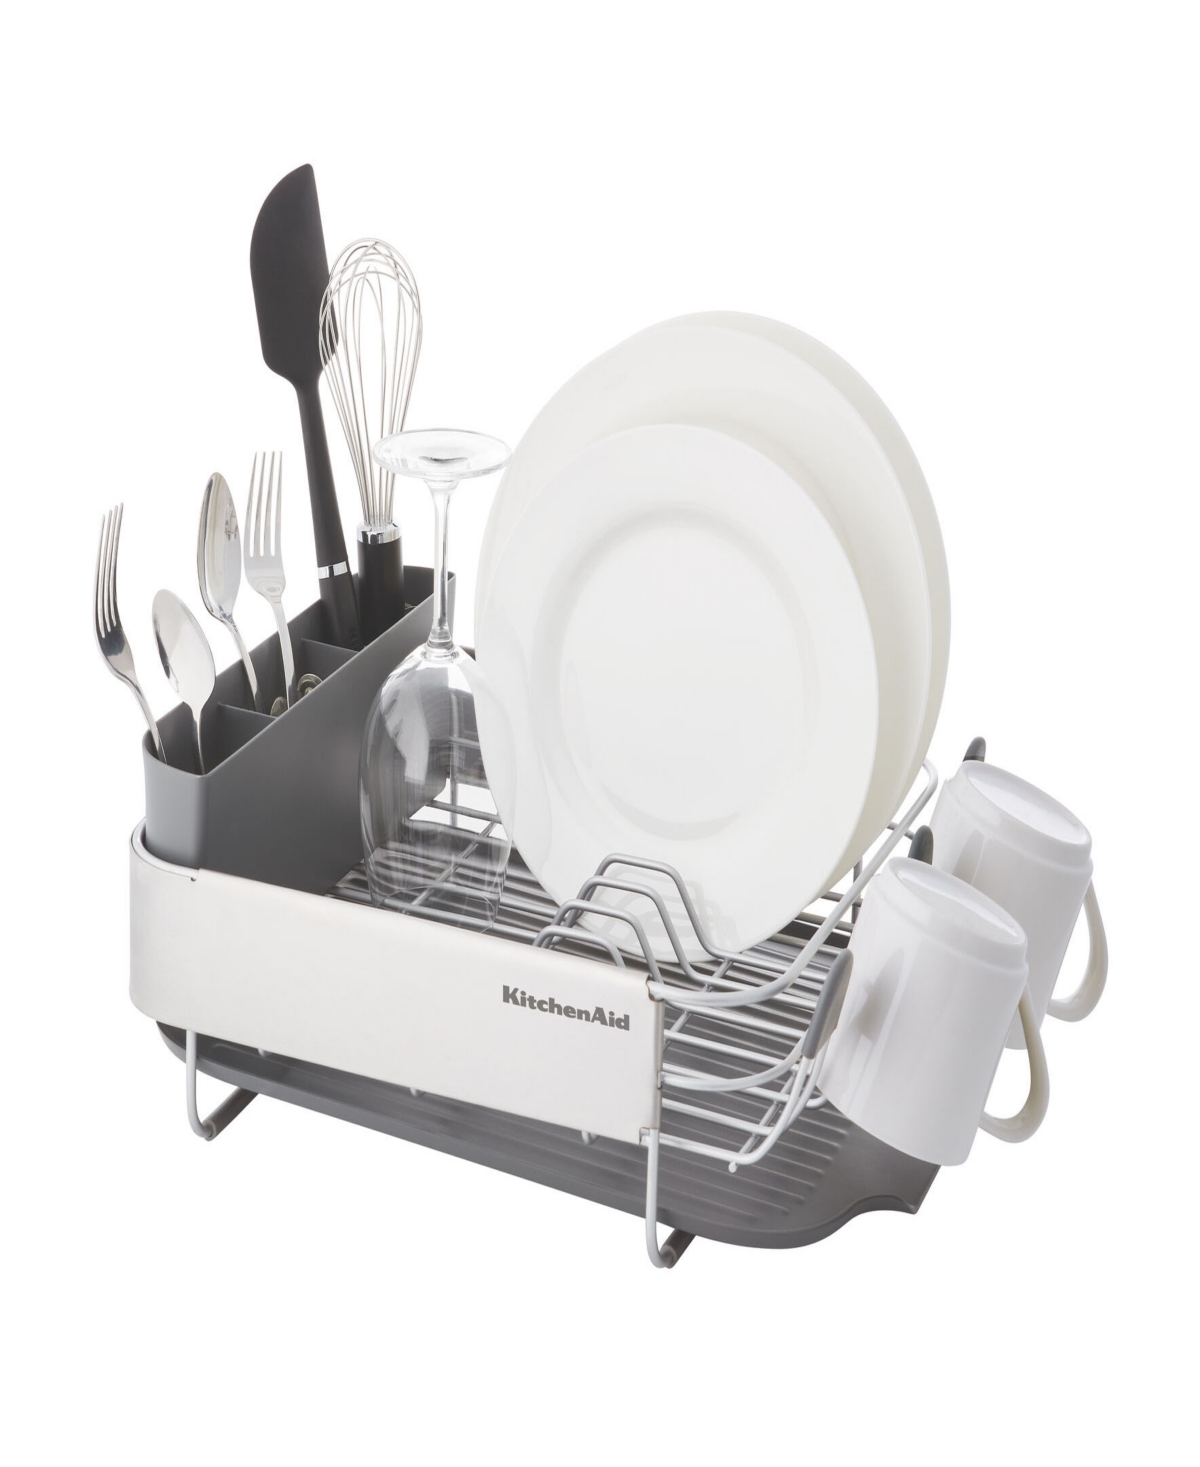 Kitchenaid Stainless Steel Wrap Compact Dish Rack In Charcoal